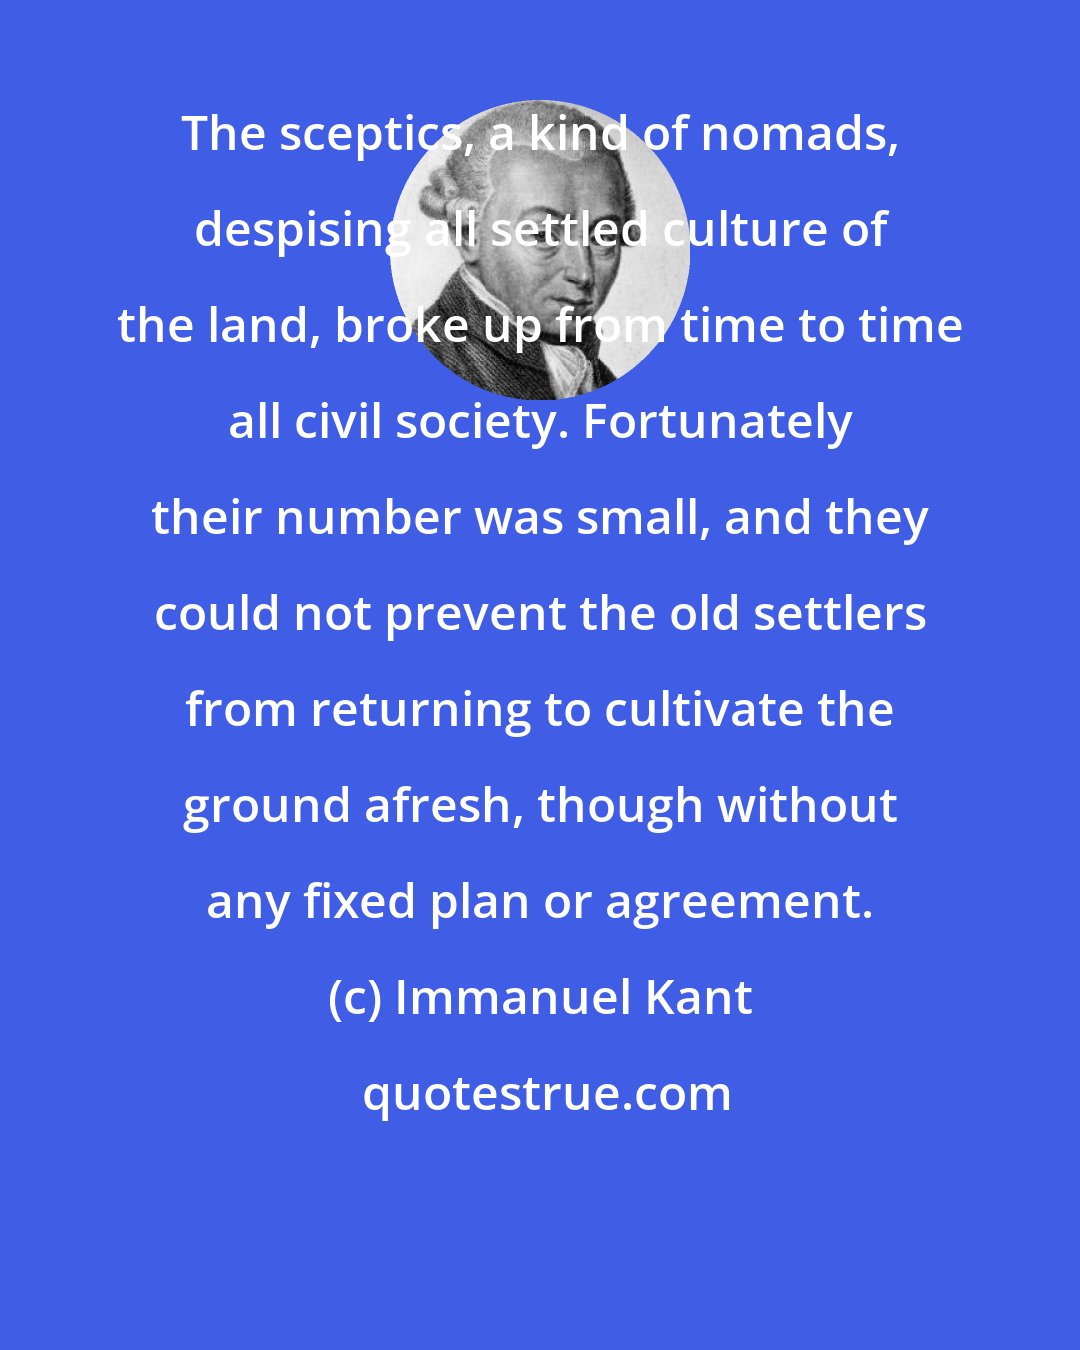 Immanuel Kant: The sceptics, a kind of nomads, despising all settled culture of the land, broke up from time to time all civil society. Fortunately their number was small, and they could not prevent the old settlers from returning to cultivate the ground afresh, though without any fixed plan or agreement.